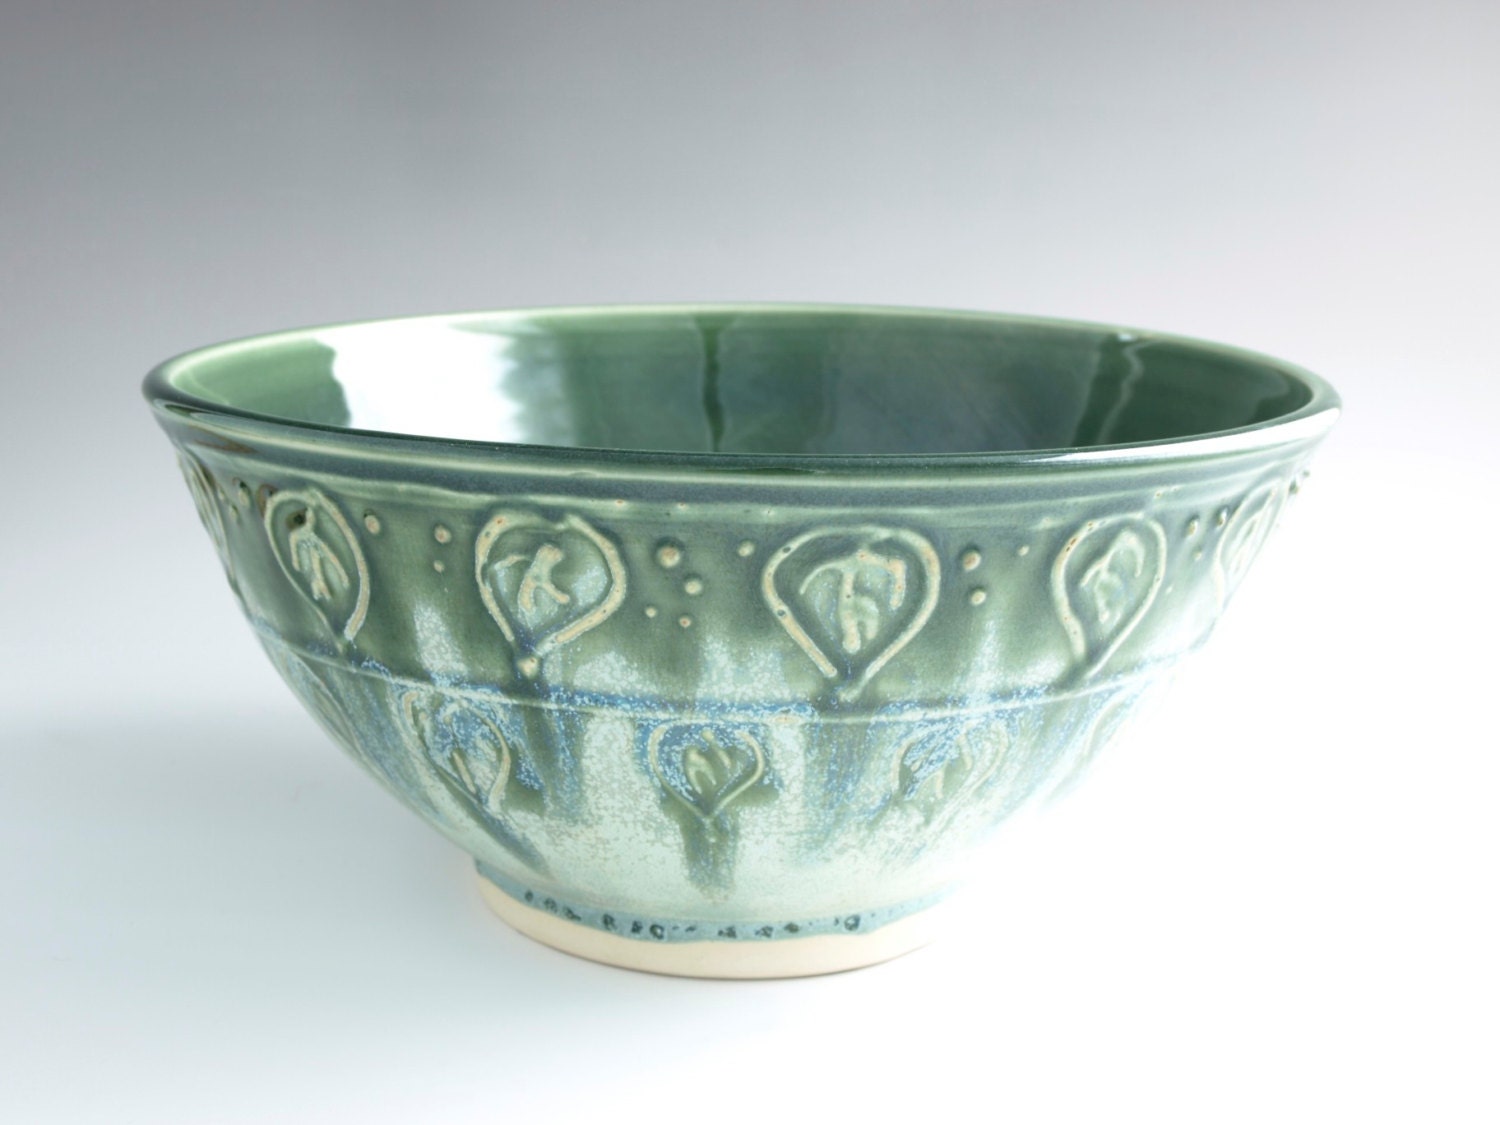 Extra Large Giant Size Serving Bowl Pottery Leaf Emerald Green Mint Chocolate Chip - Ready to Ship